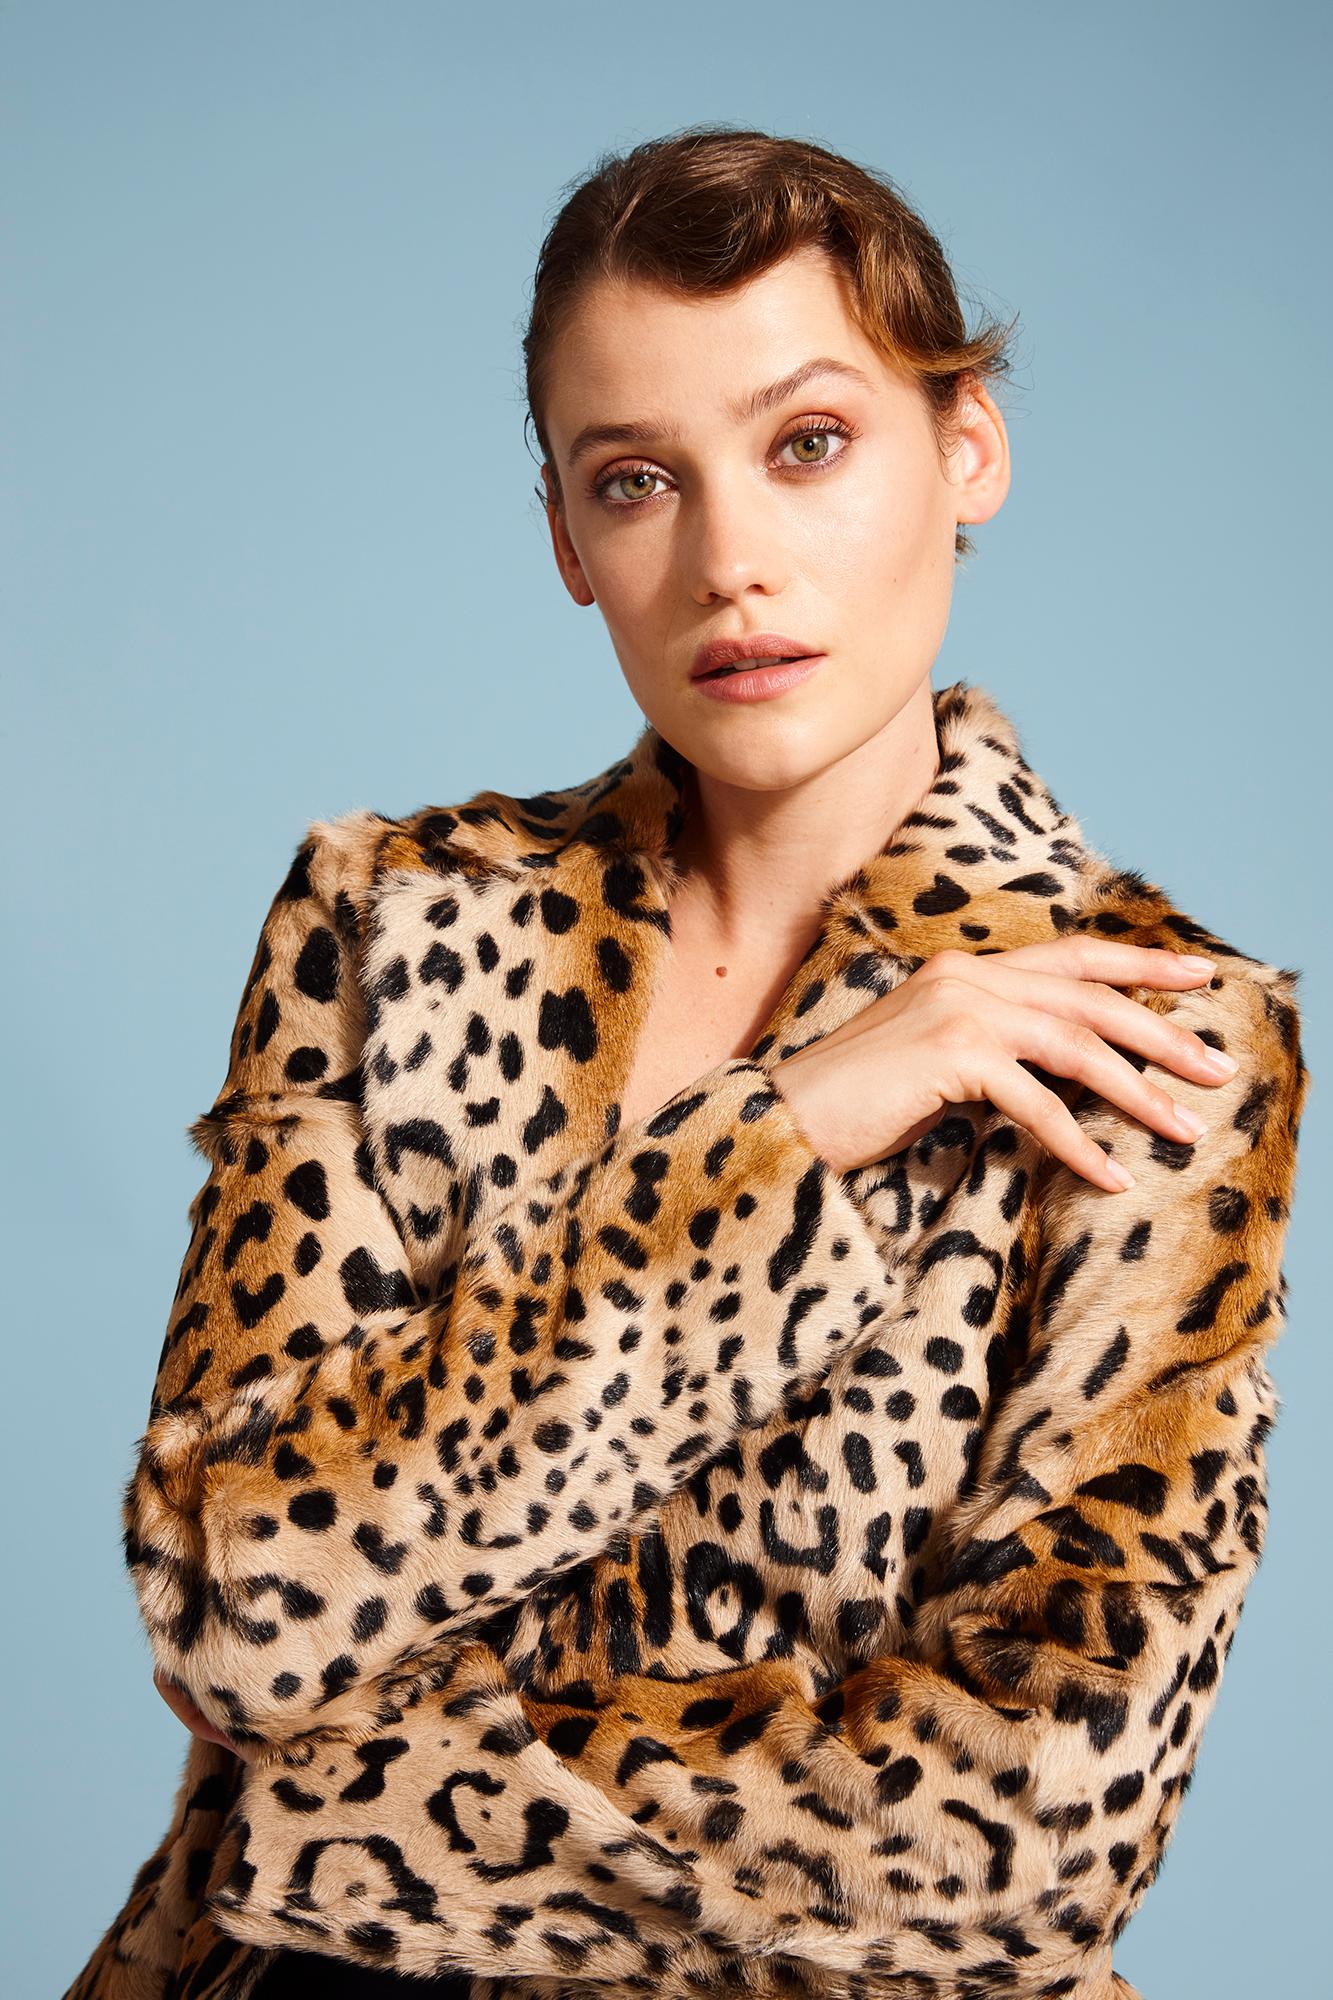 
Verheyen London Leopard Print Coat in Natural Goat Hair Fur UK 12 

This Leopard print coat is Verheyen London’s classic staple for effortless style and glamour. Verheyen London is a luxury brand who specialises in outerwear that will last forever